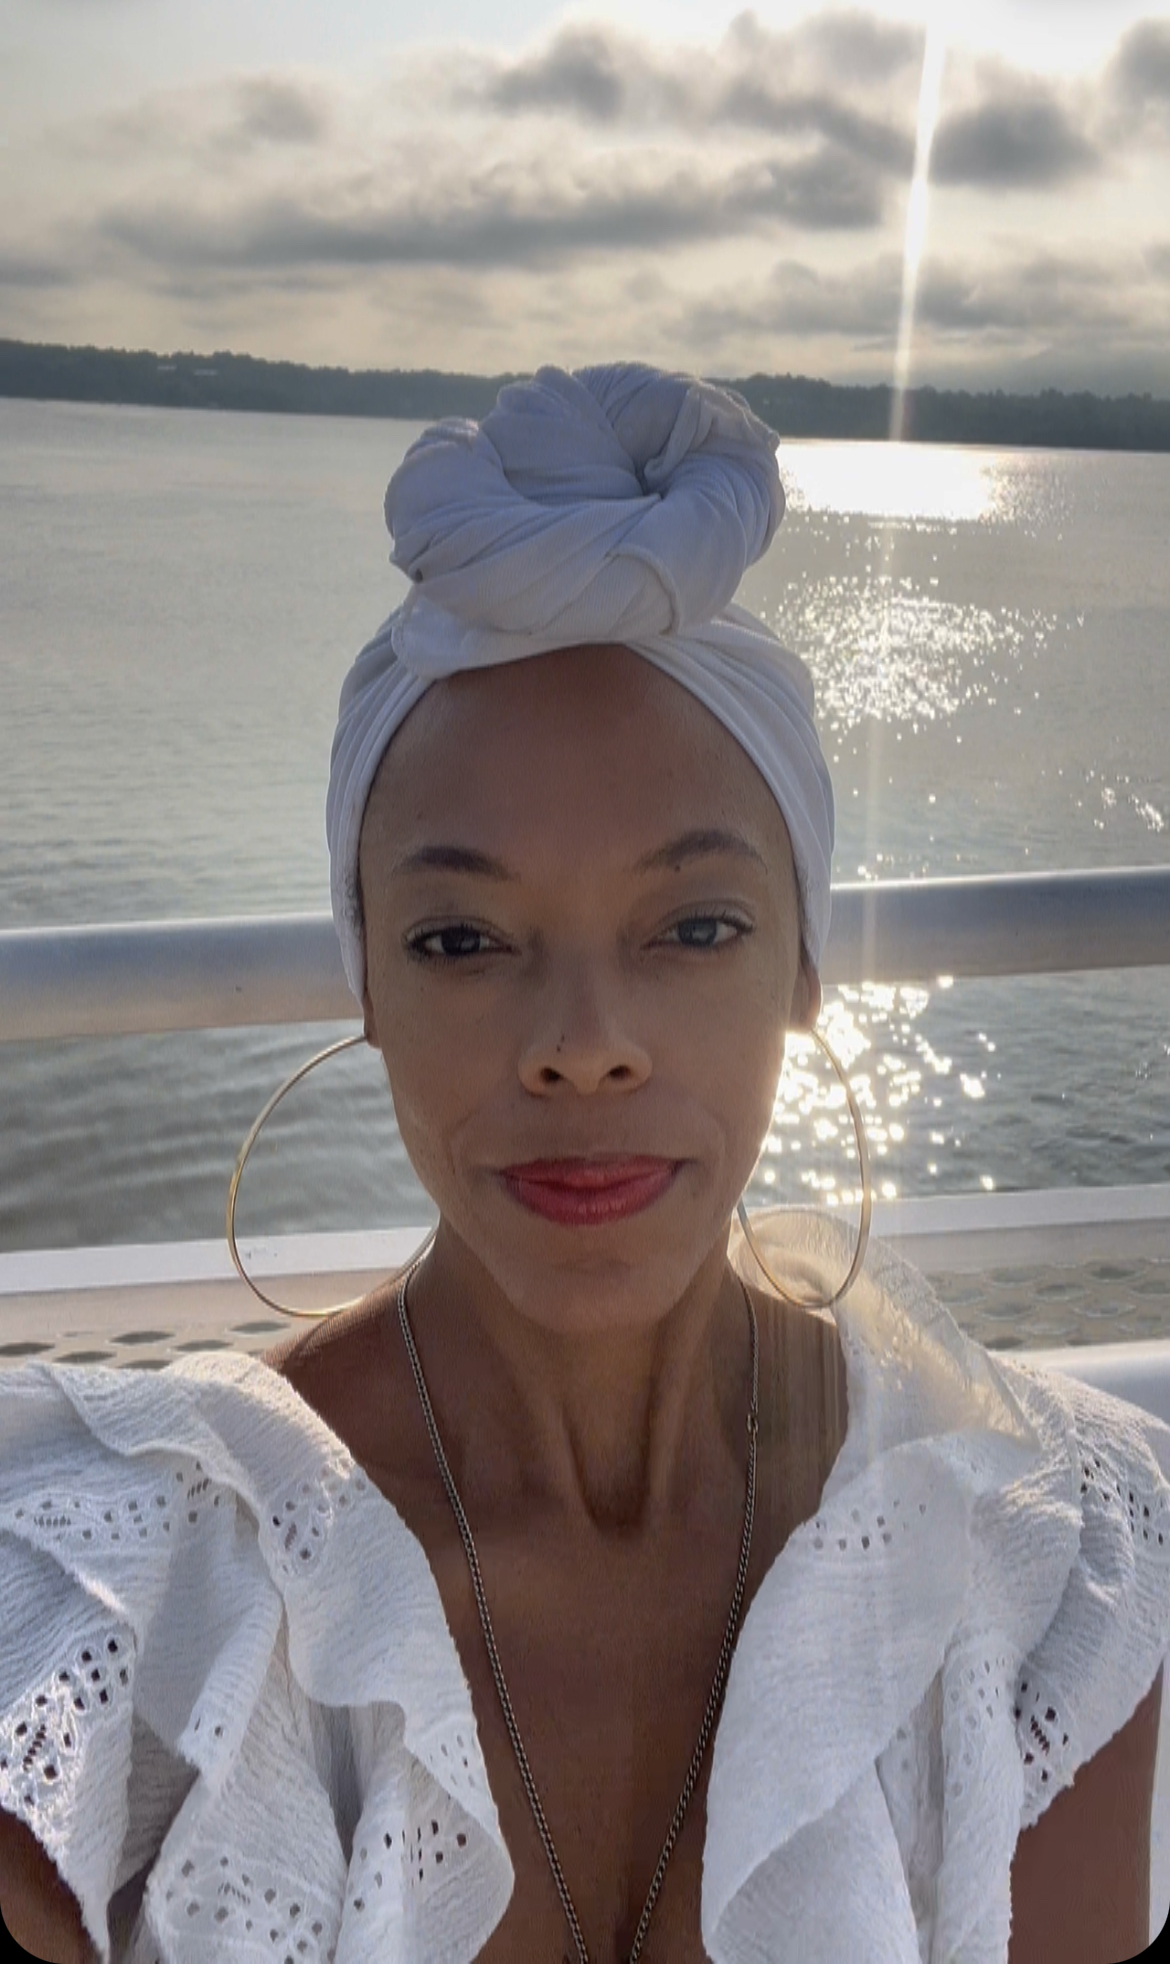 A photo of Gogo smiling in a white headwrap on the water.